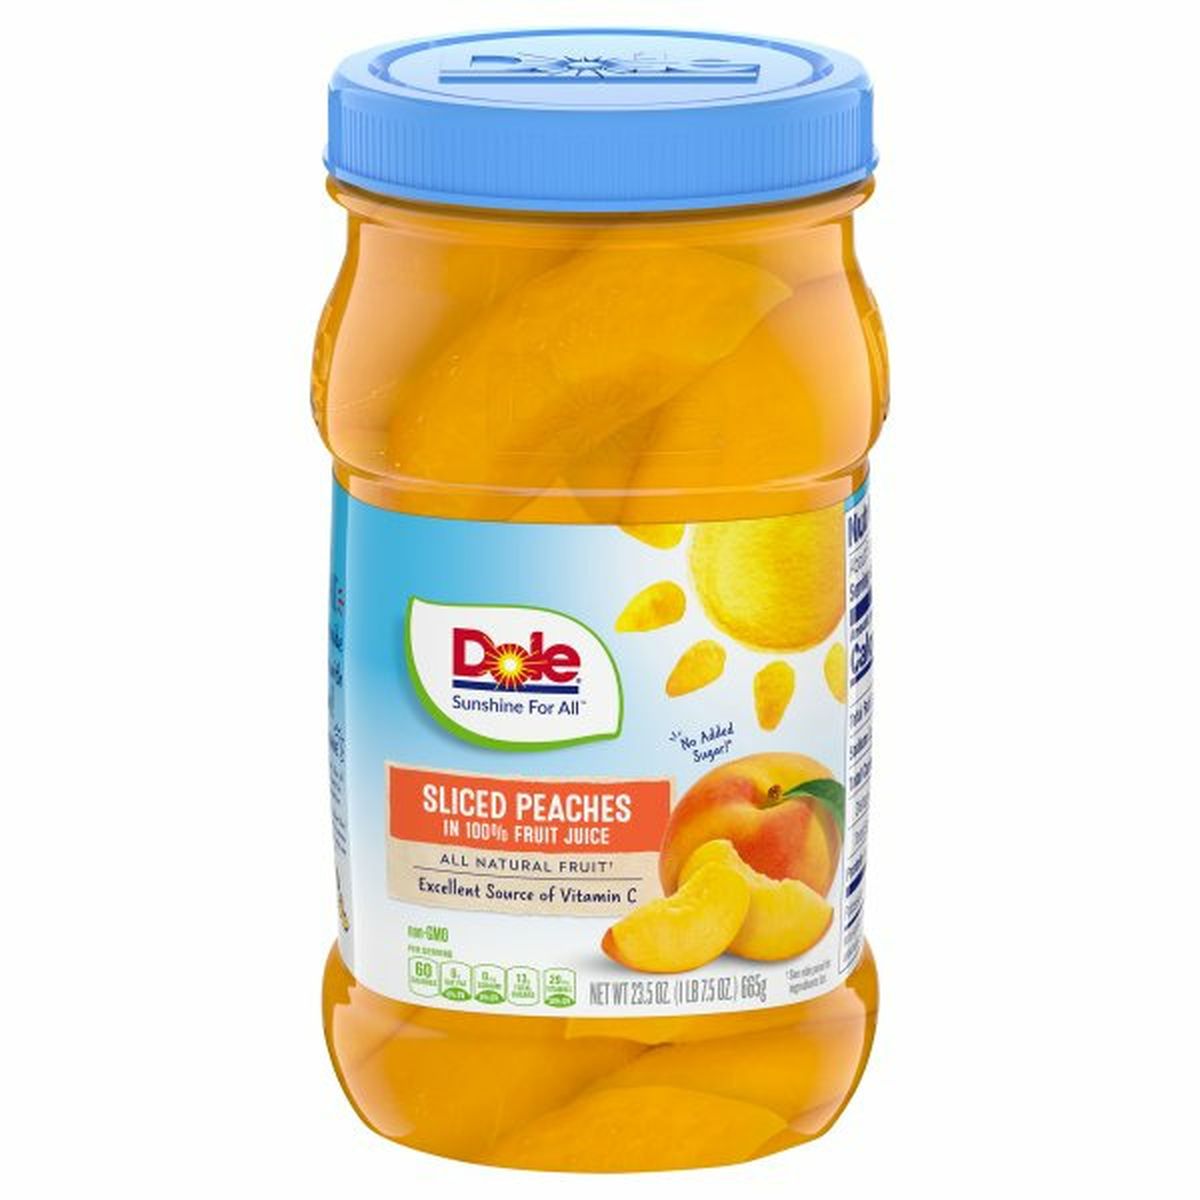 Calories in Dole Peaches in 100% Fruit Juice, Sliced